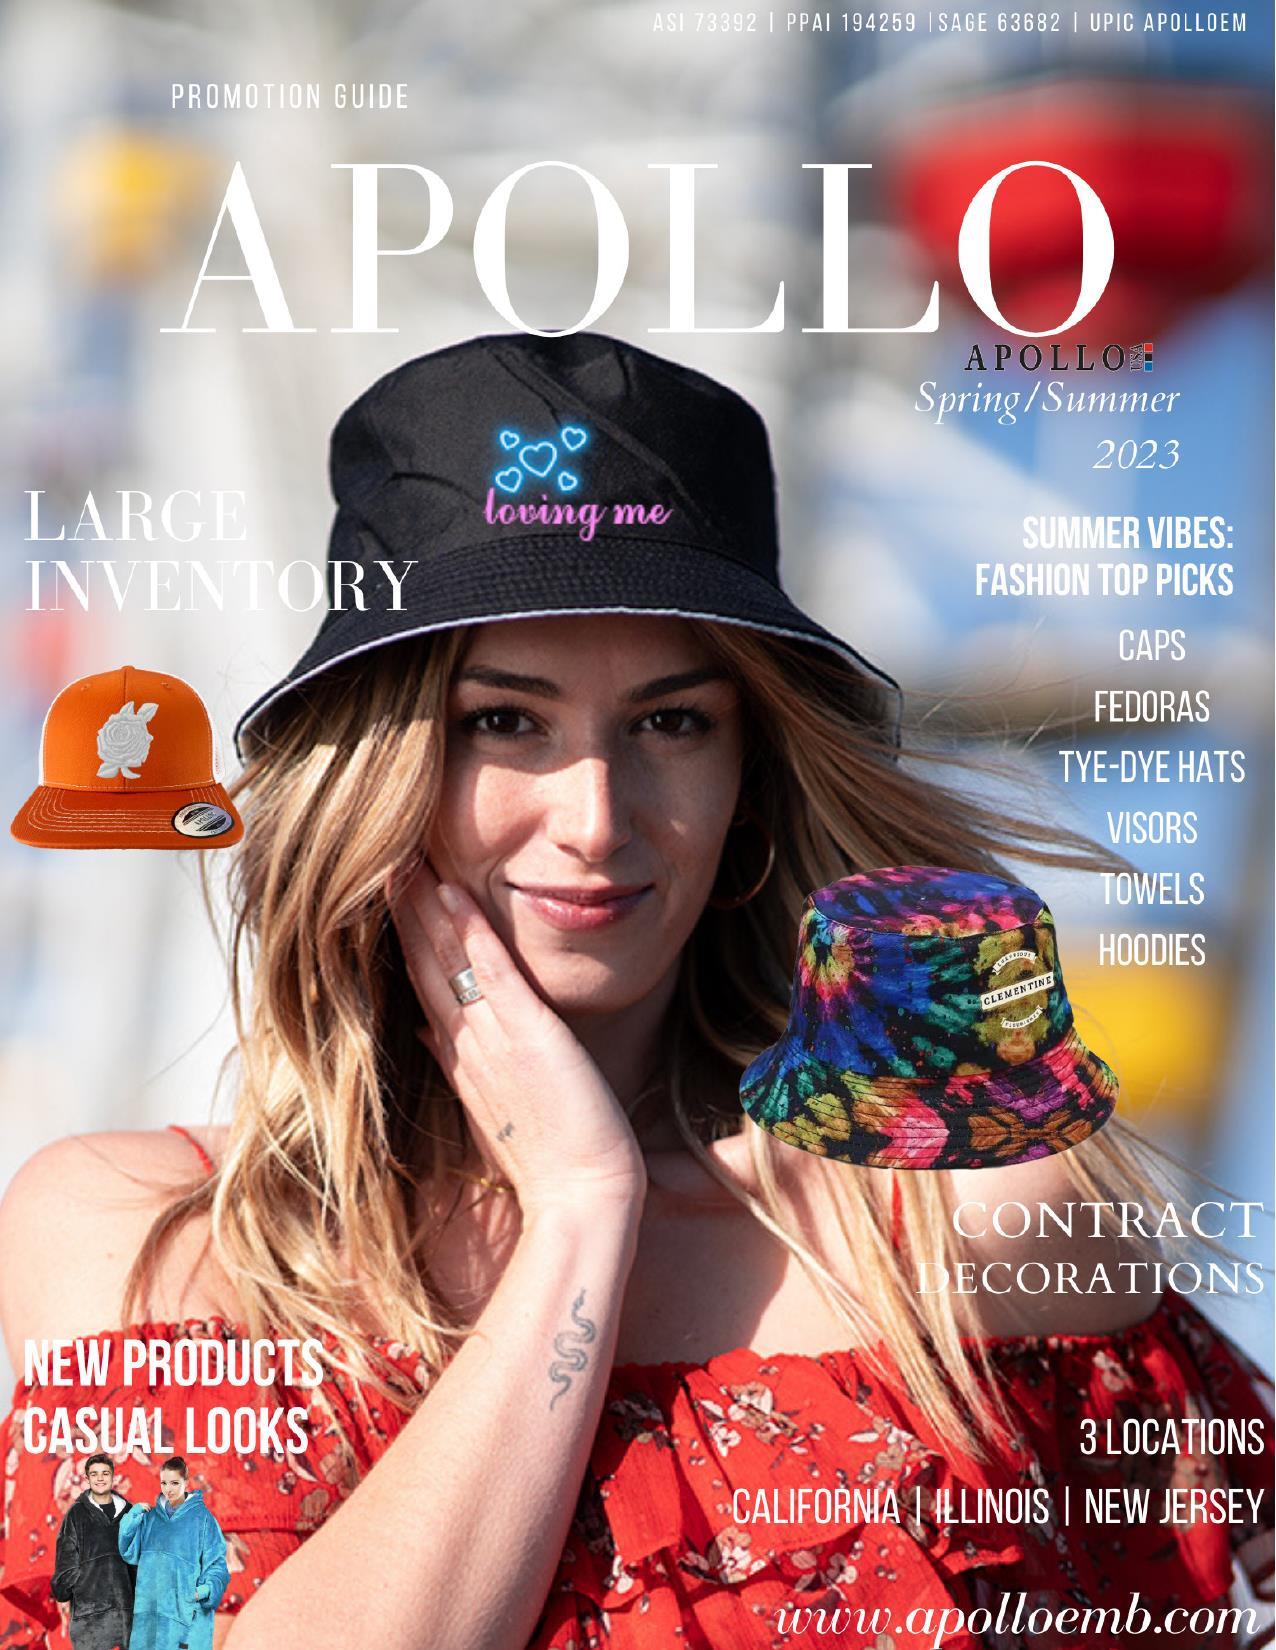 Apollo Spring / Summer Promotional Item Guide 2023